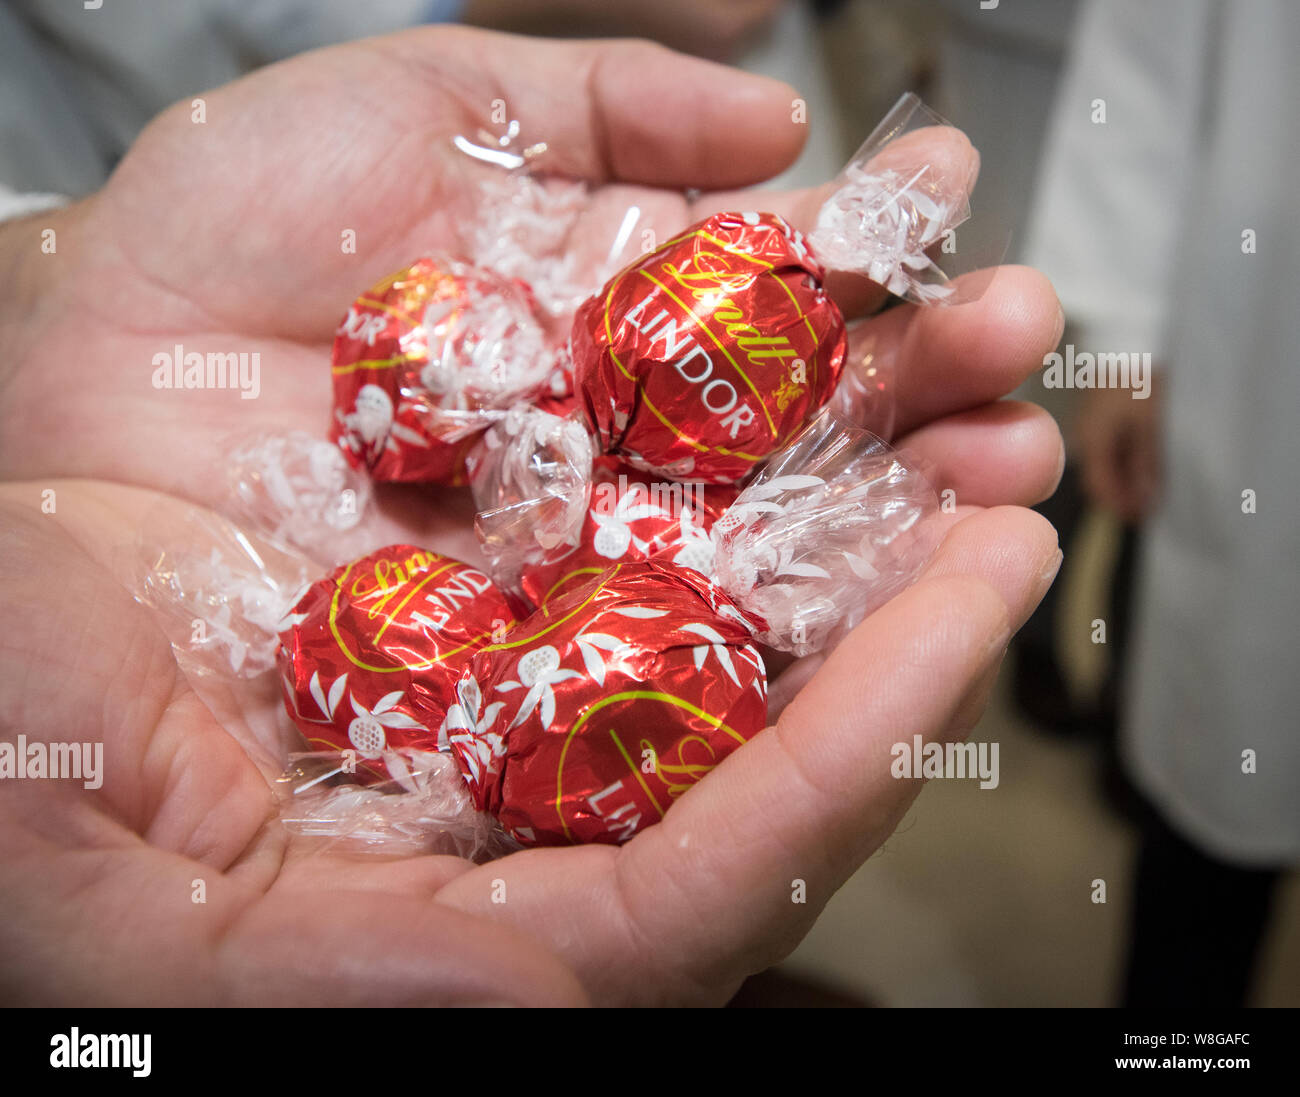 Man holding a handful of individually wrapped Lindt Lindor candies Stock Photo